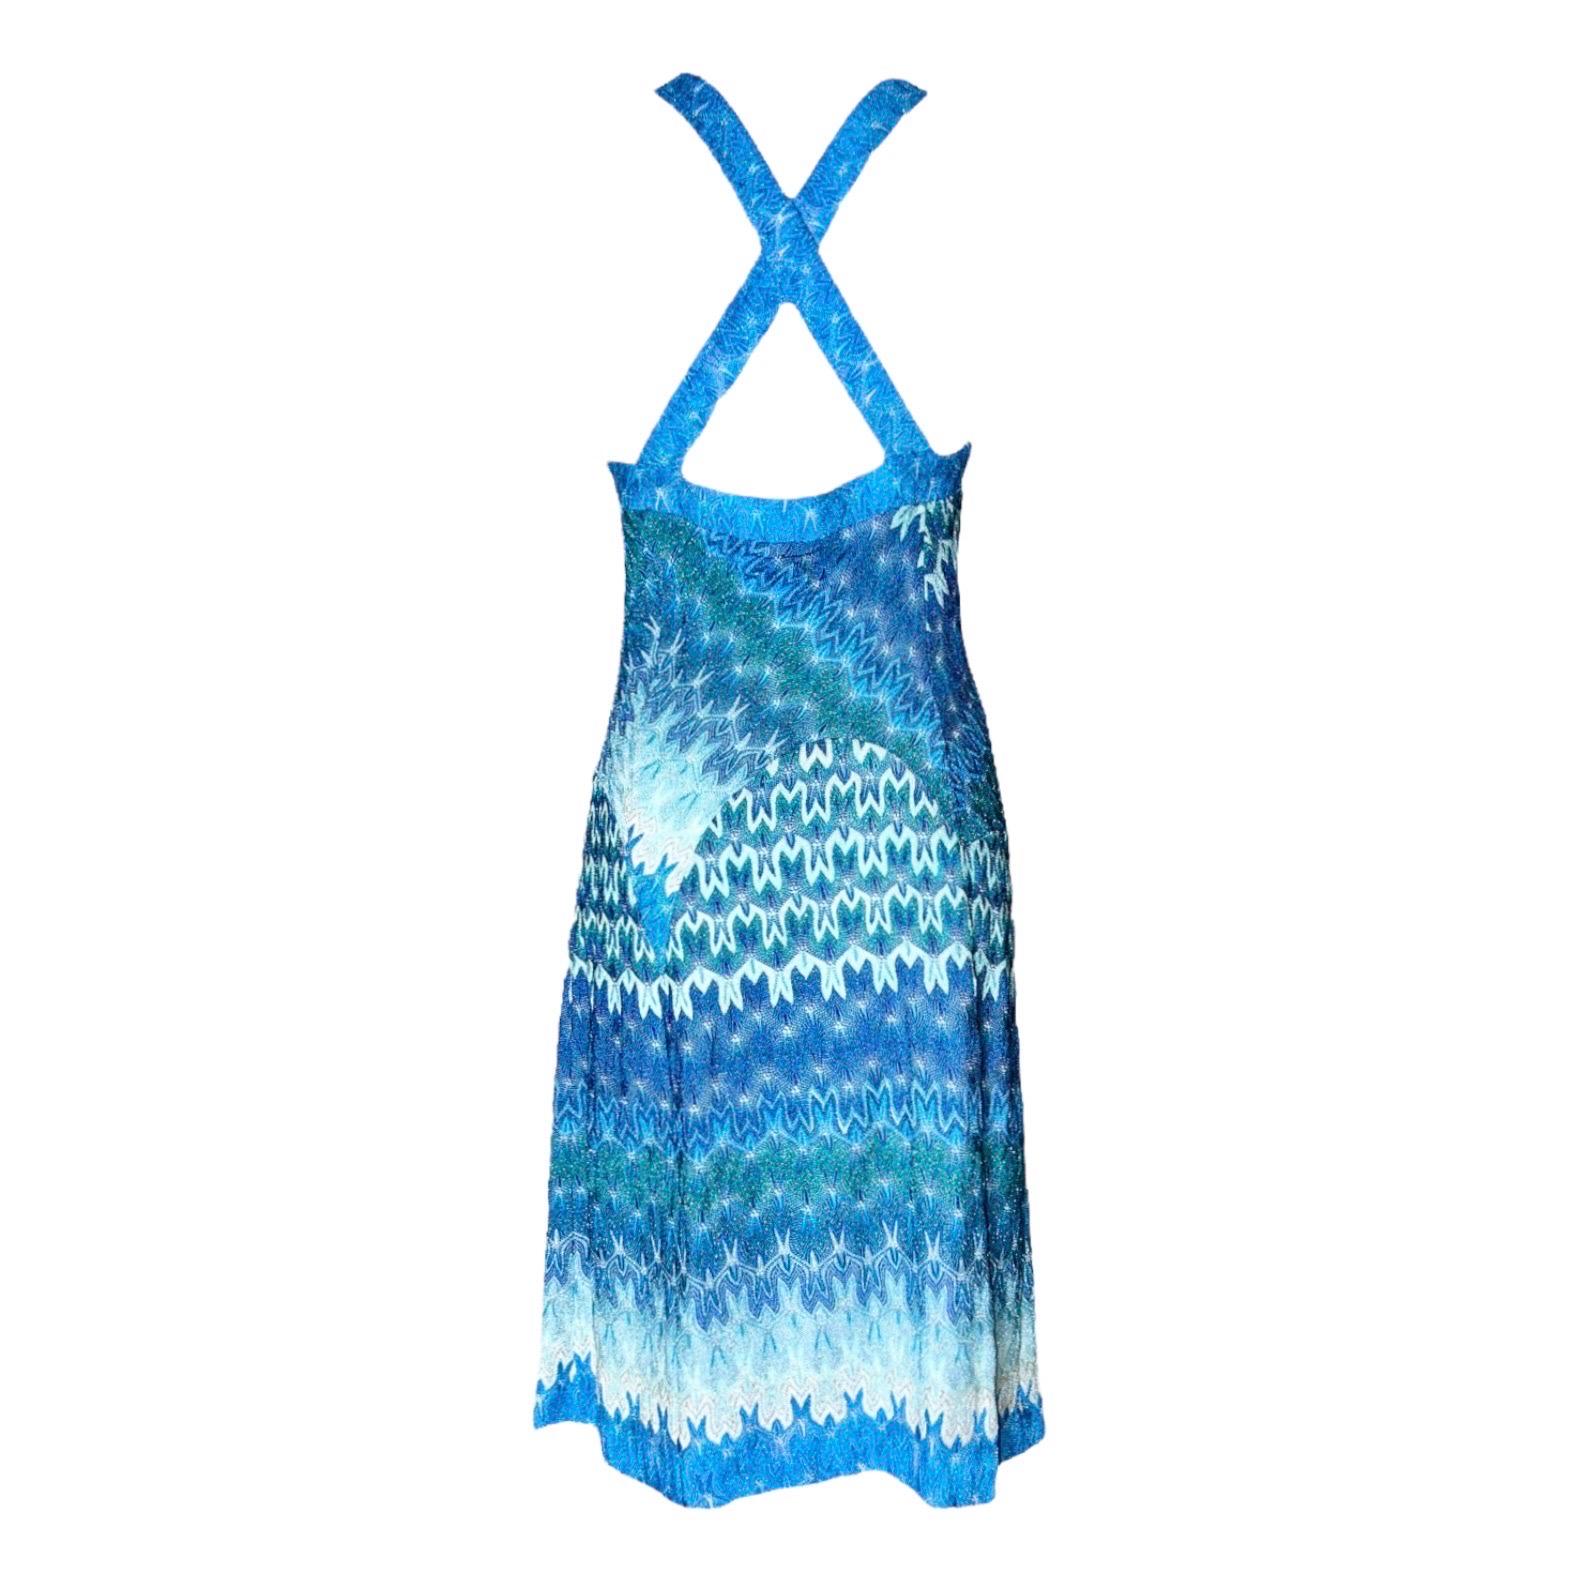 Get set to shimmer in Missoni's dress. Effortlessly channeling the current aquatic trend, this wonderful style has an underwater sheen thanks to the stunning fusion of sea-green and azure-blue hues. Wear it after dark with sky-high heels, adding